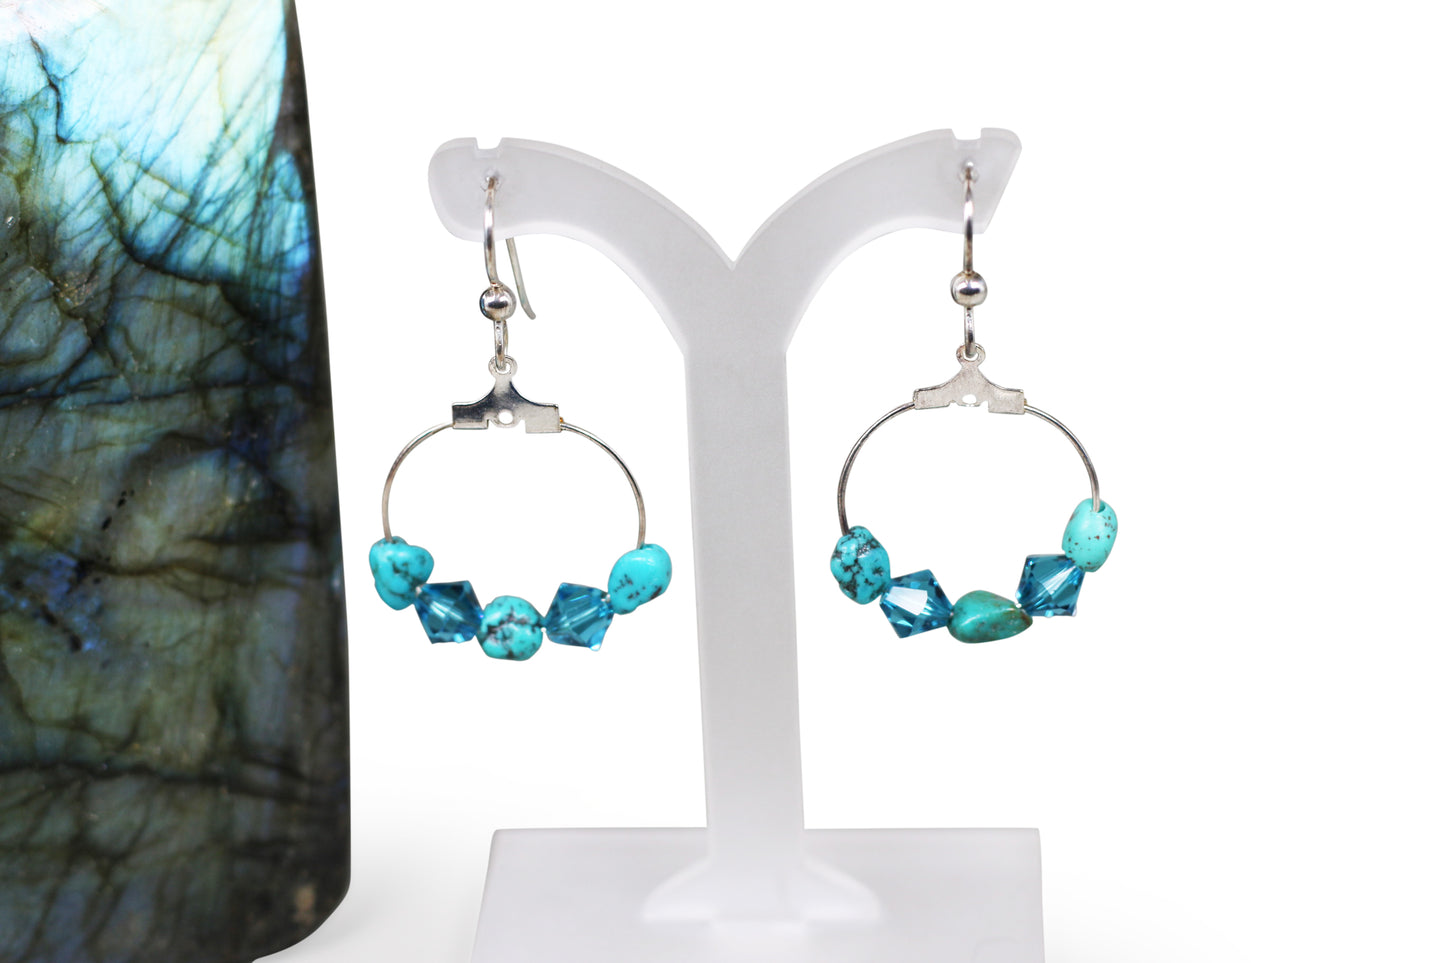 Turquoise Treated Gemstone and Turquoise Austrian Crystals Sterling Silver Fishhook Earrings with Hoop